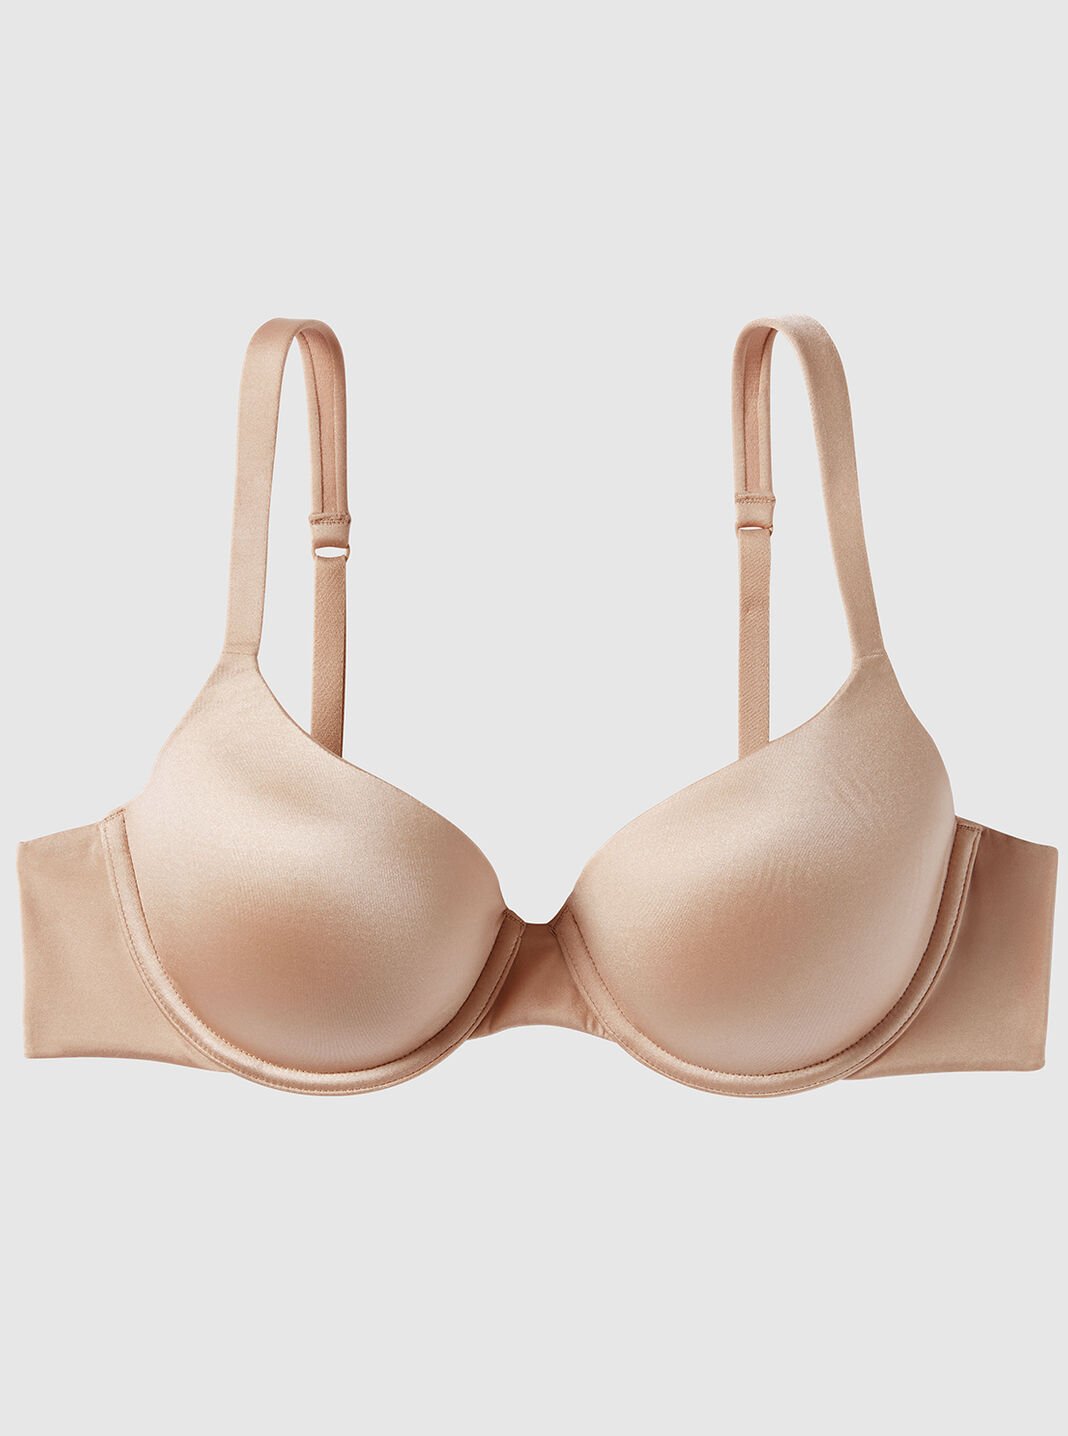 ZHANGZONG Camilace Comfort Wireless Front CZHANGZONG Bra, Front  CZHANGZONGre Posture Corrector Seamless Full Coverage Bra for Women : Buy  Online at Best Price in KSA - Souq is now : Fashion